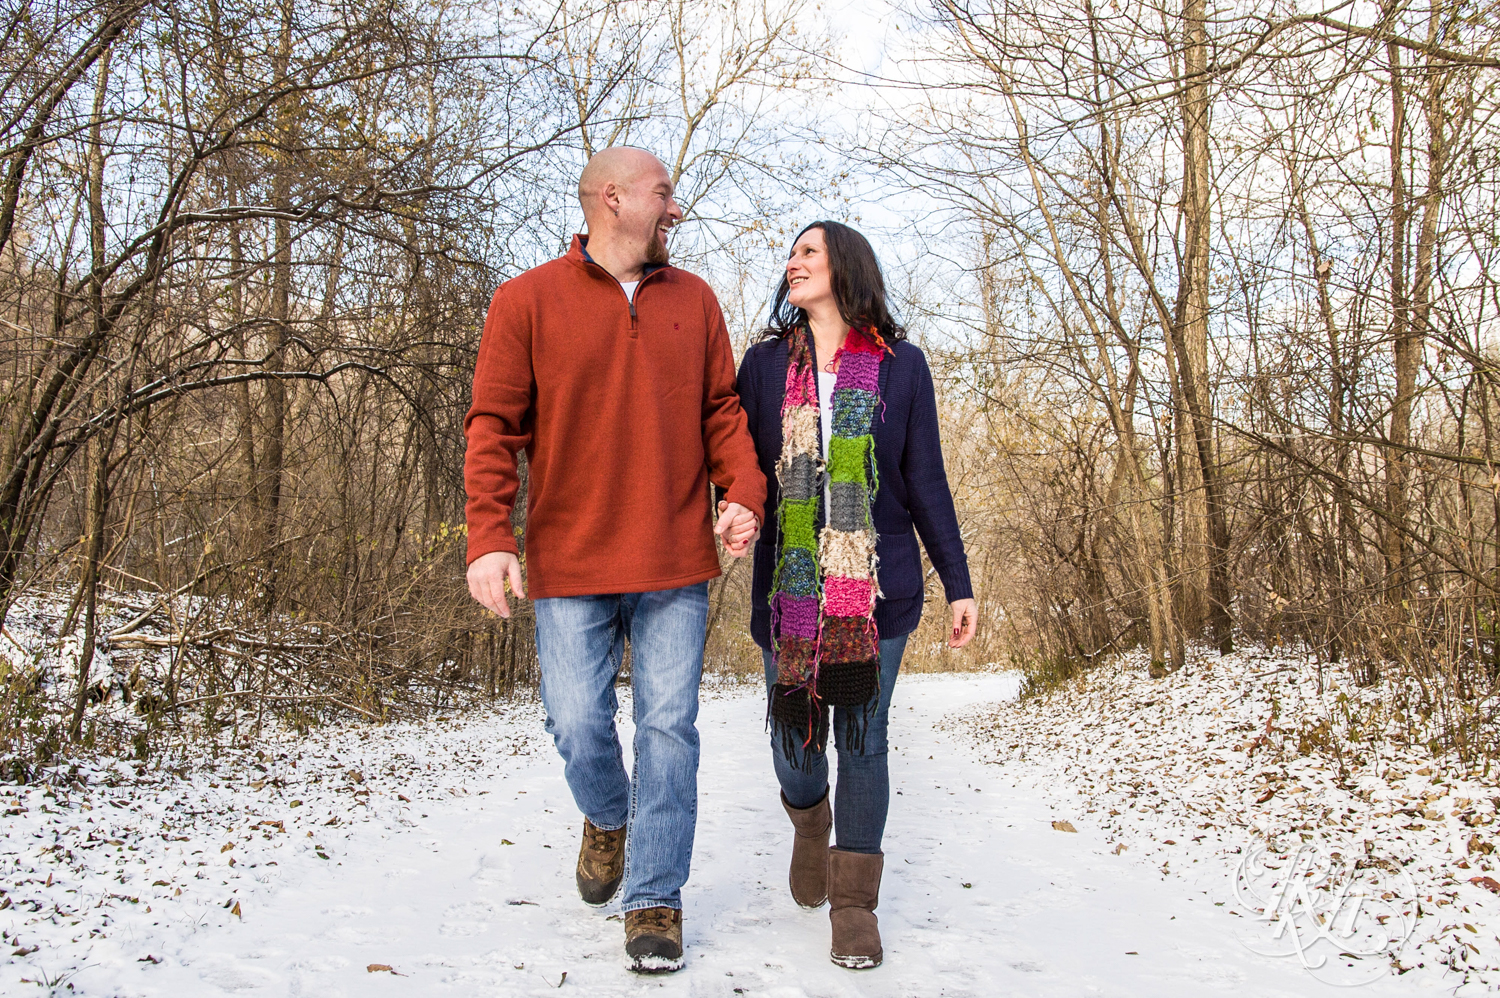 Man and woman smile while walking in snow in Hidden Valley Park in Savage, Minnesota.